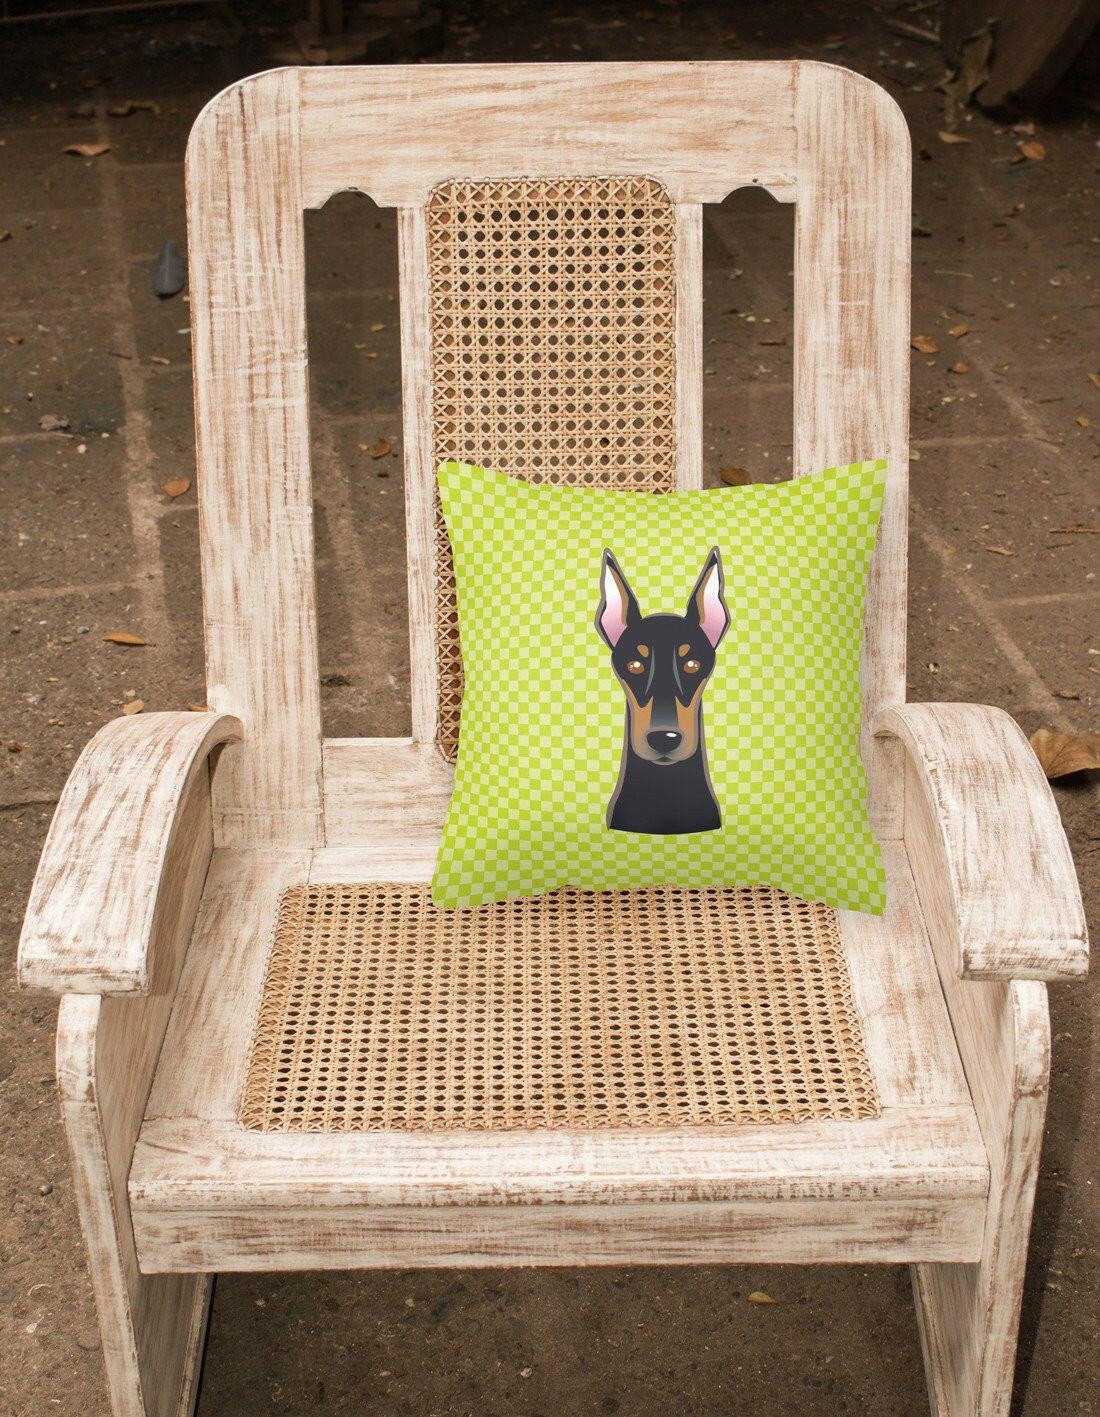 Checkerboard Lime Green Doberman Canvas Fabric Decorative Pillow BB1307PW1414 - the-store.com